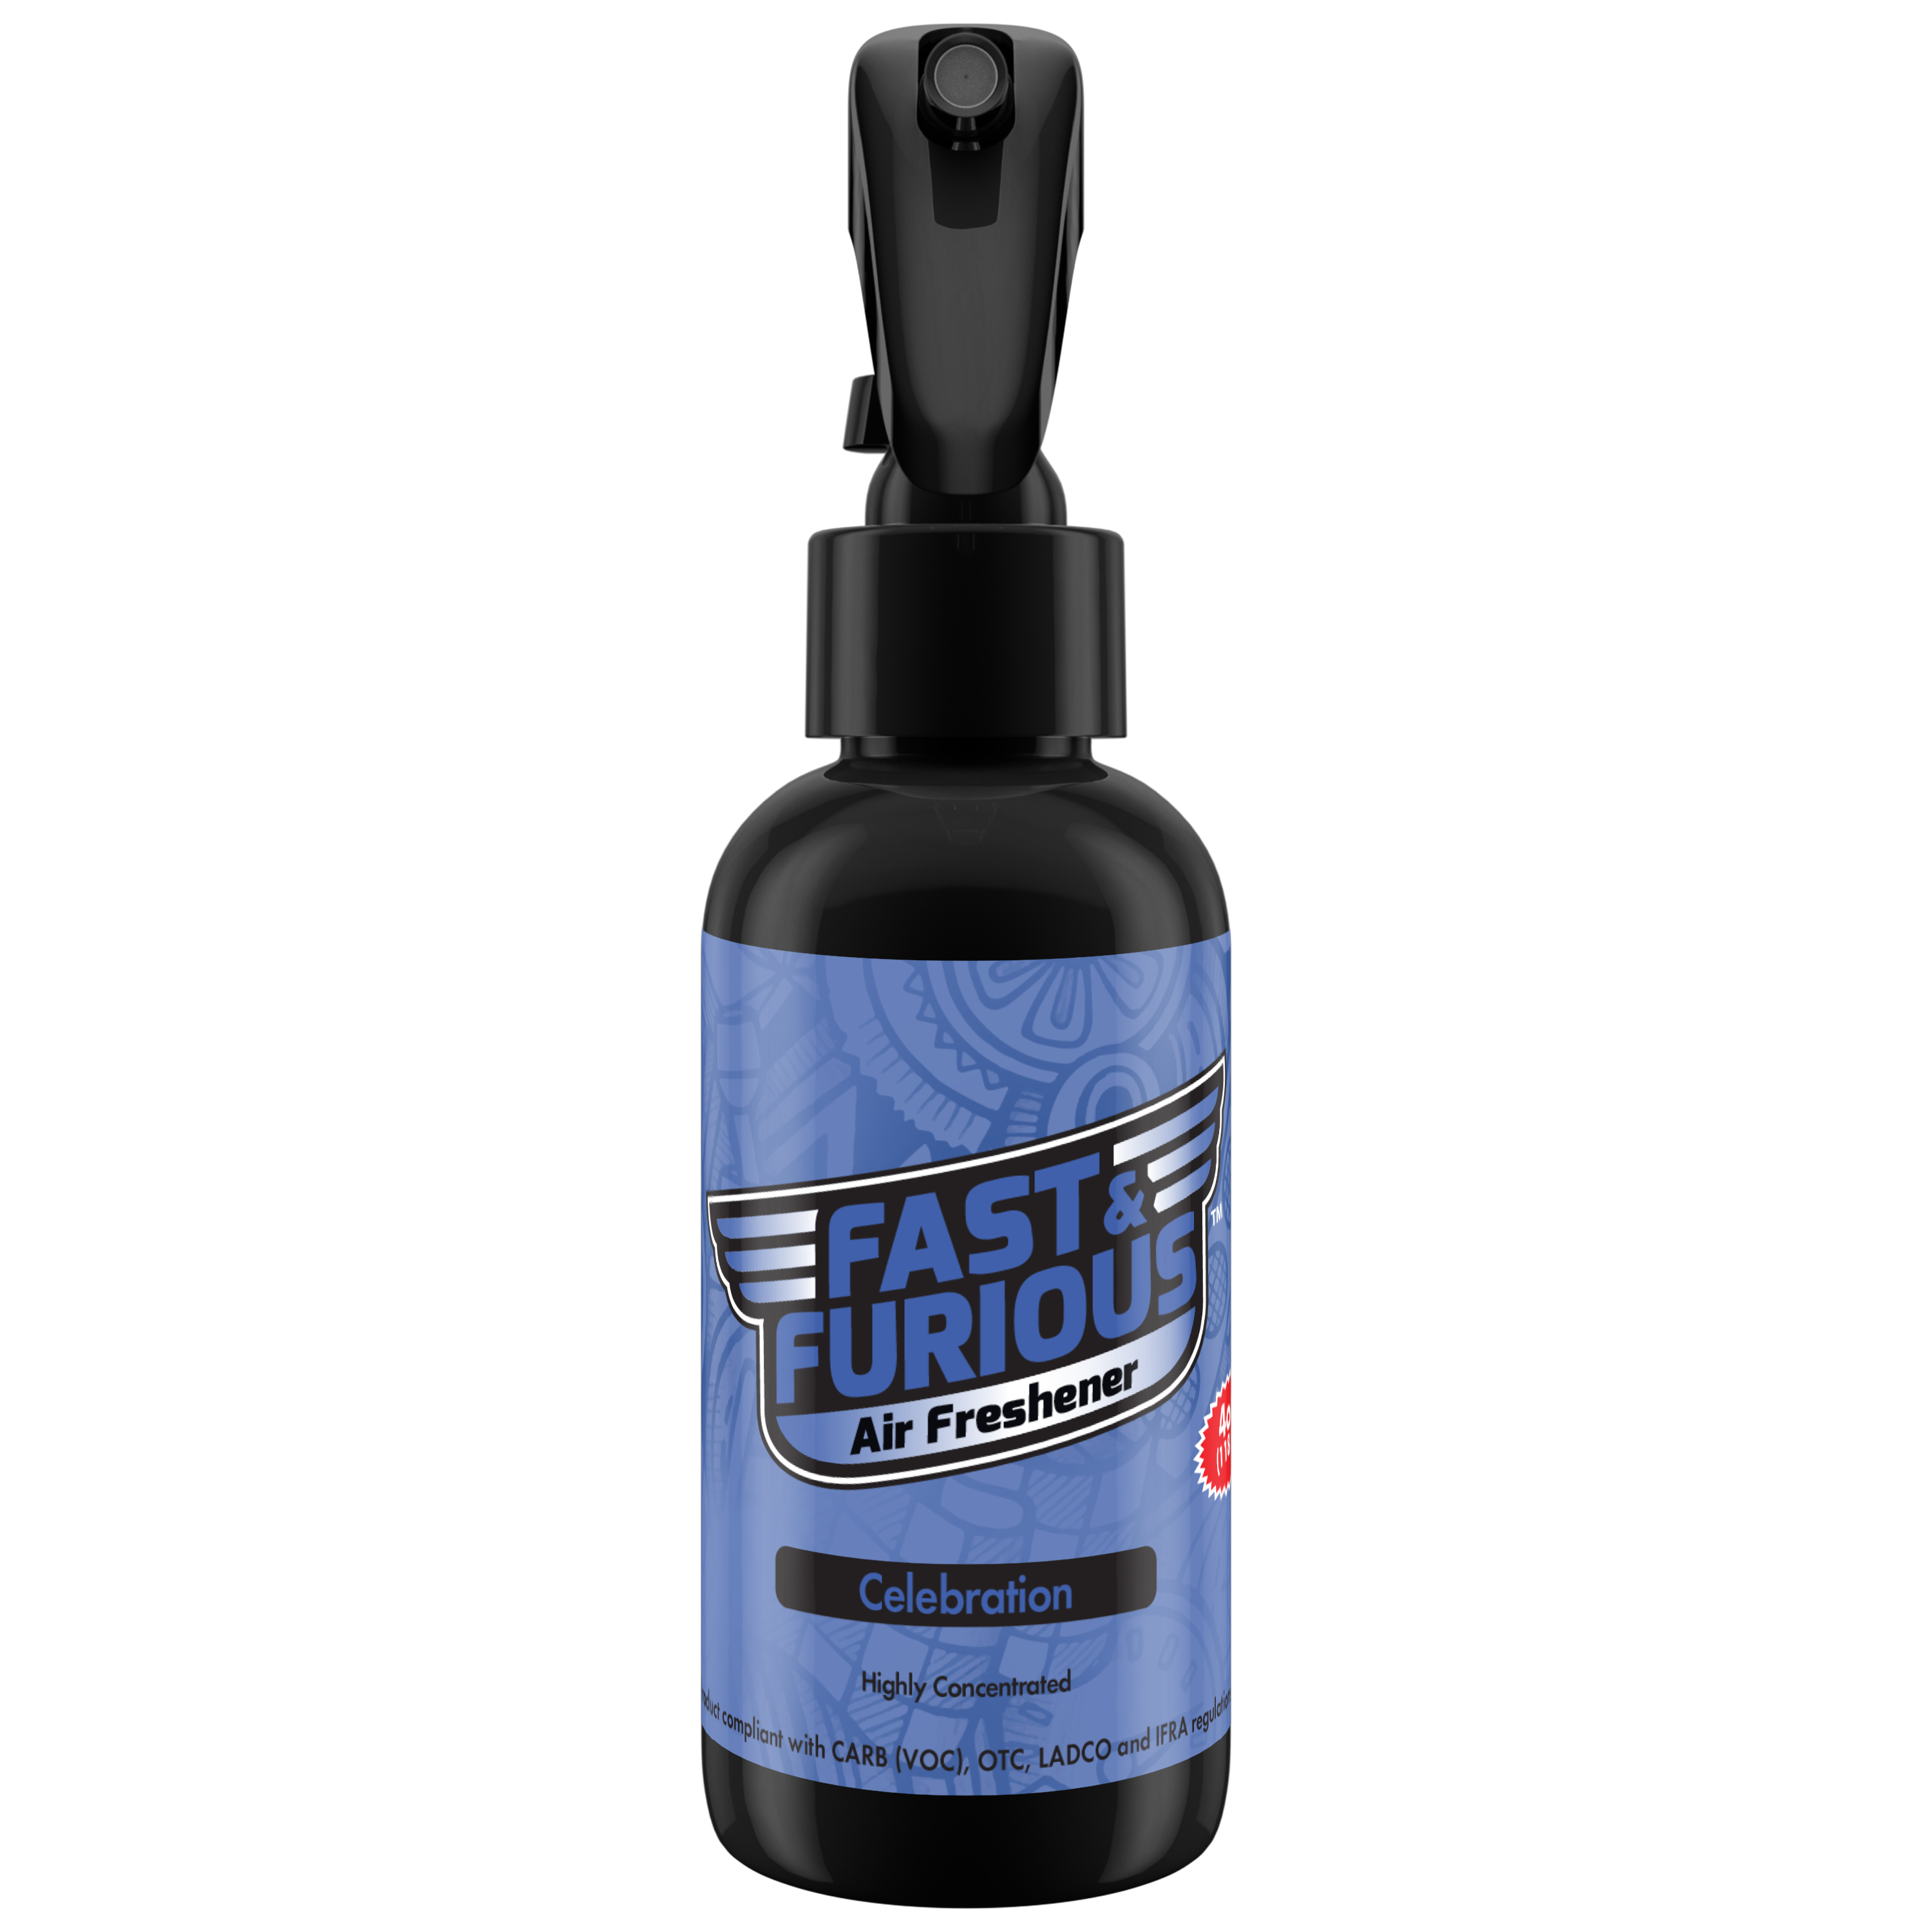 Fast and Furious Air Freshener - Celebration Scent